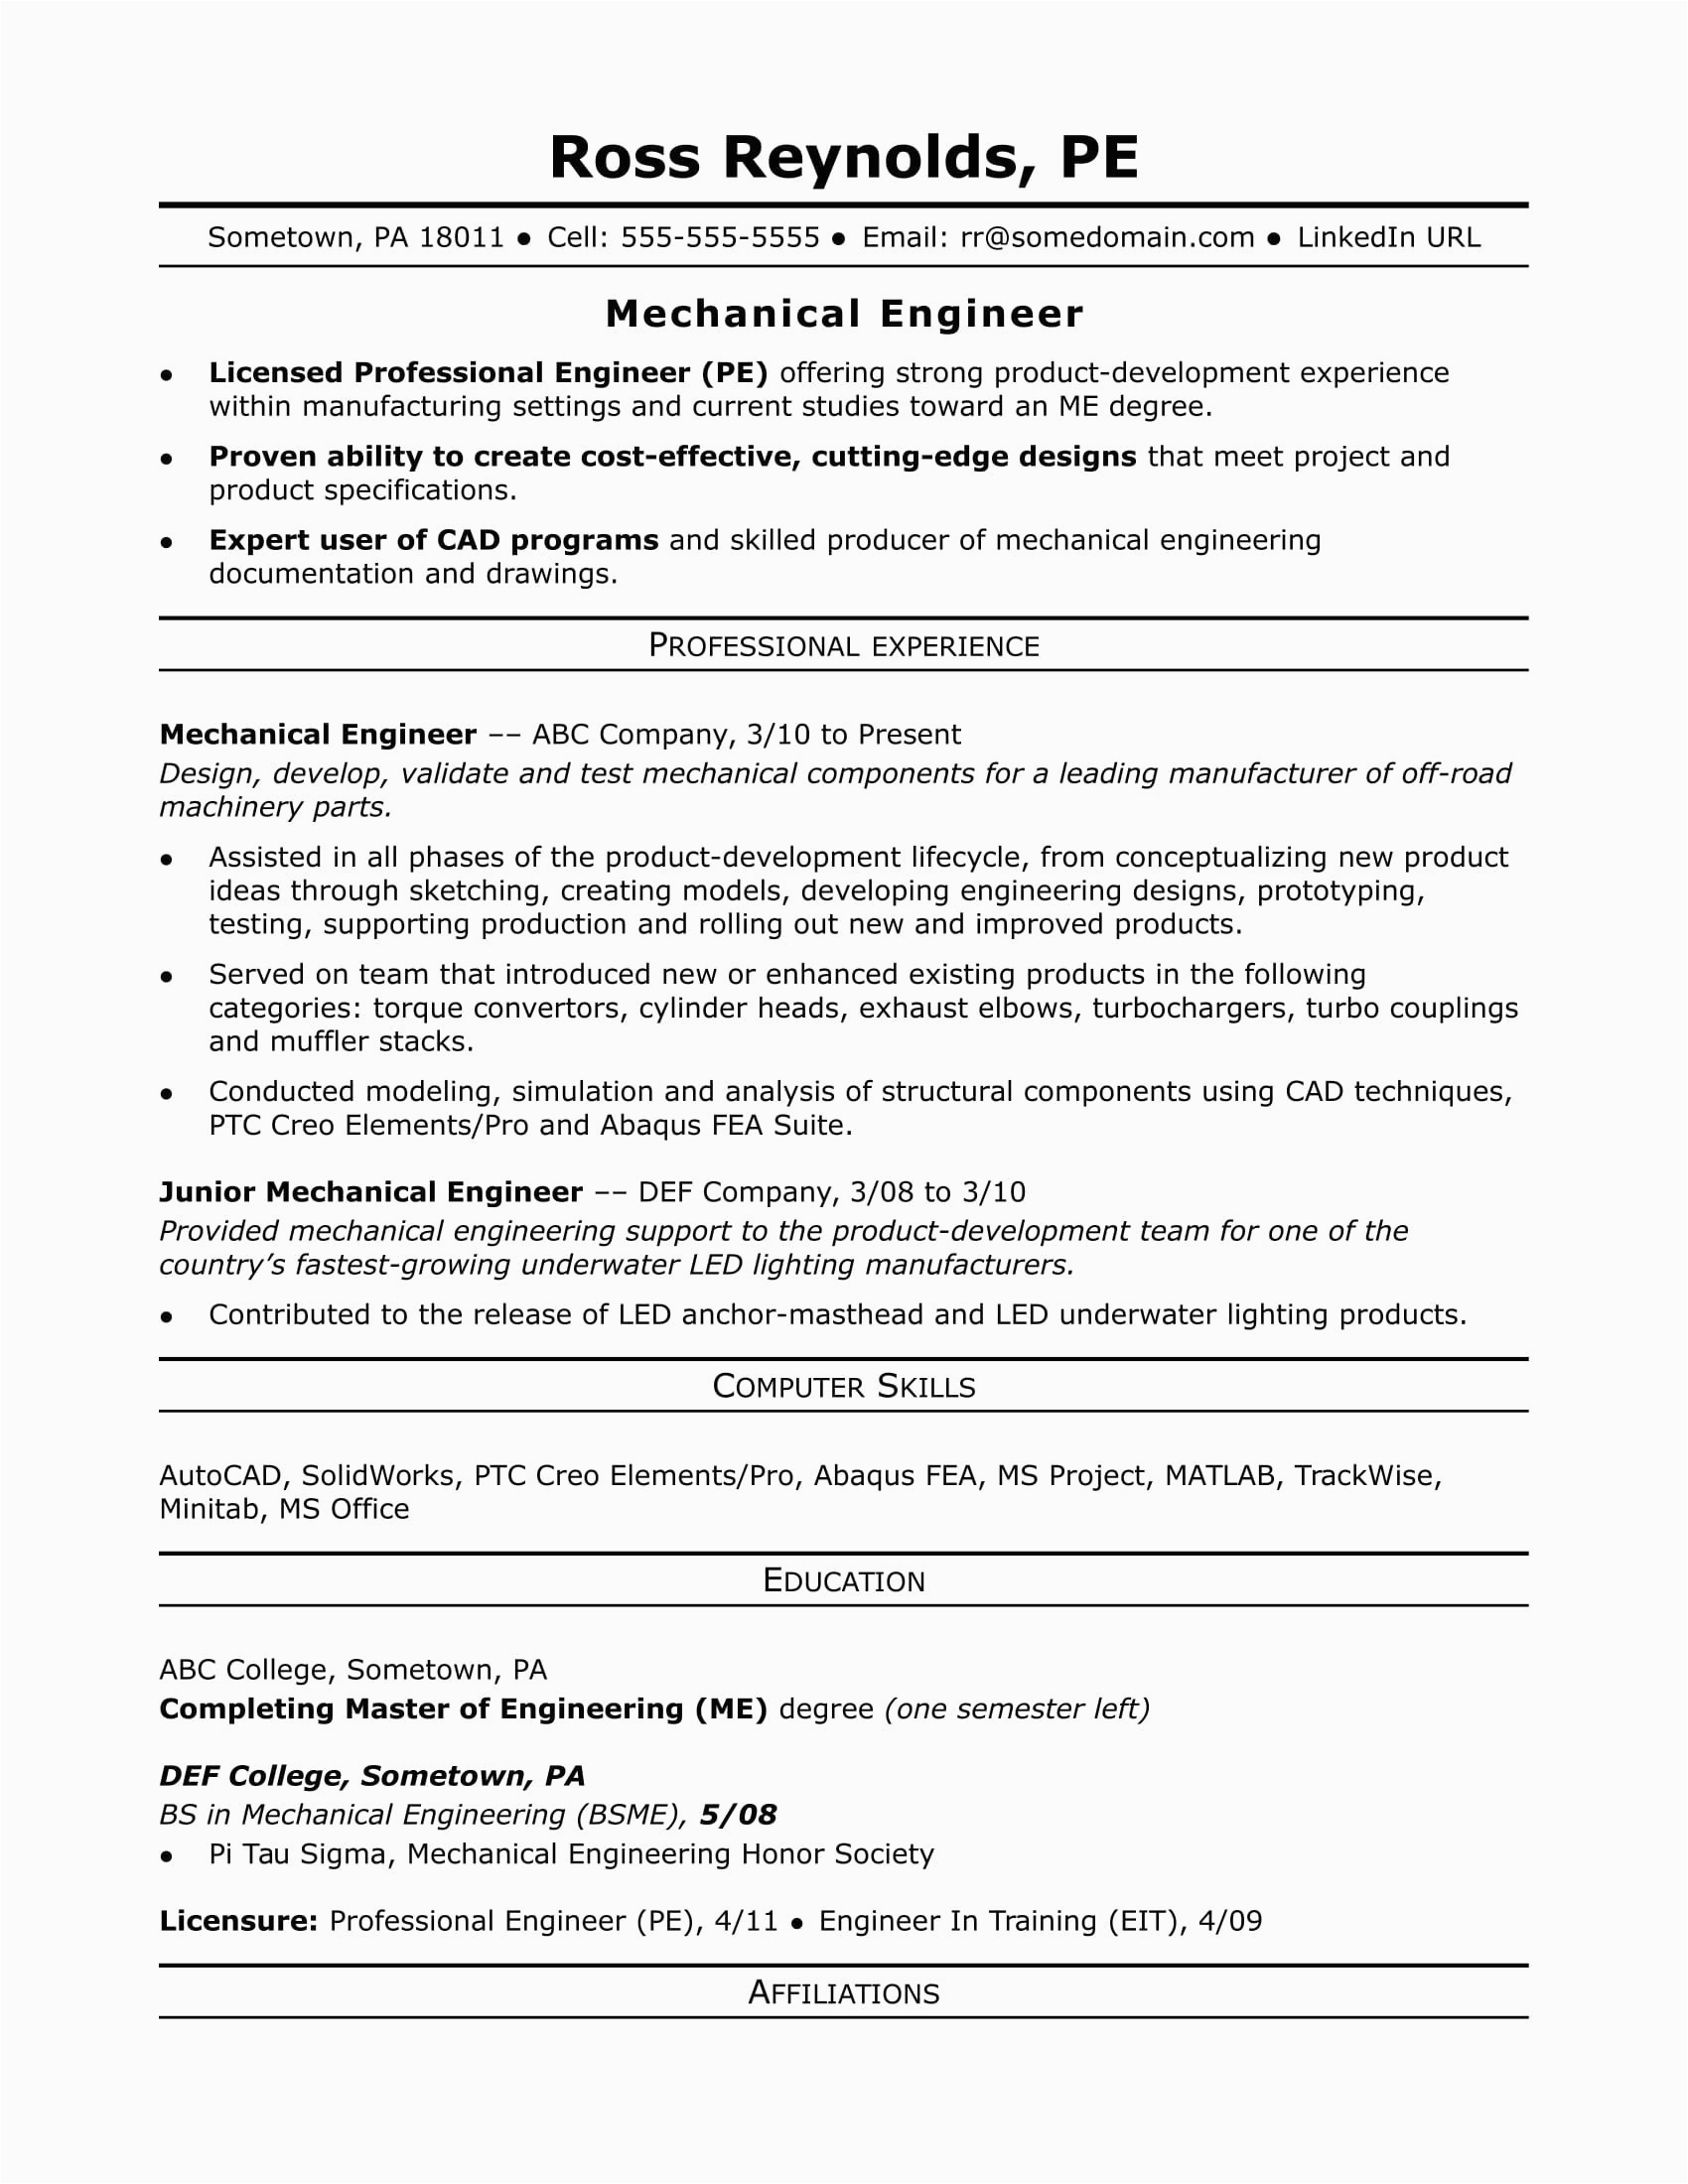 1 Year Experience Resume Sample for Mechanical Engineer 1 Year Experience Mechanical Engineer Resume Best Resume Examples